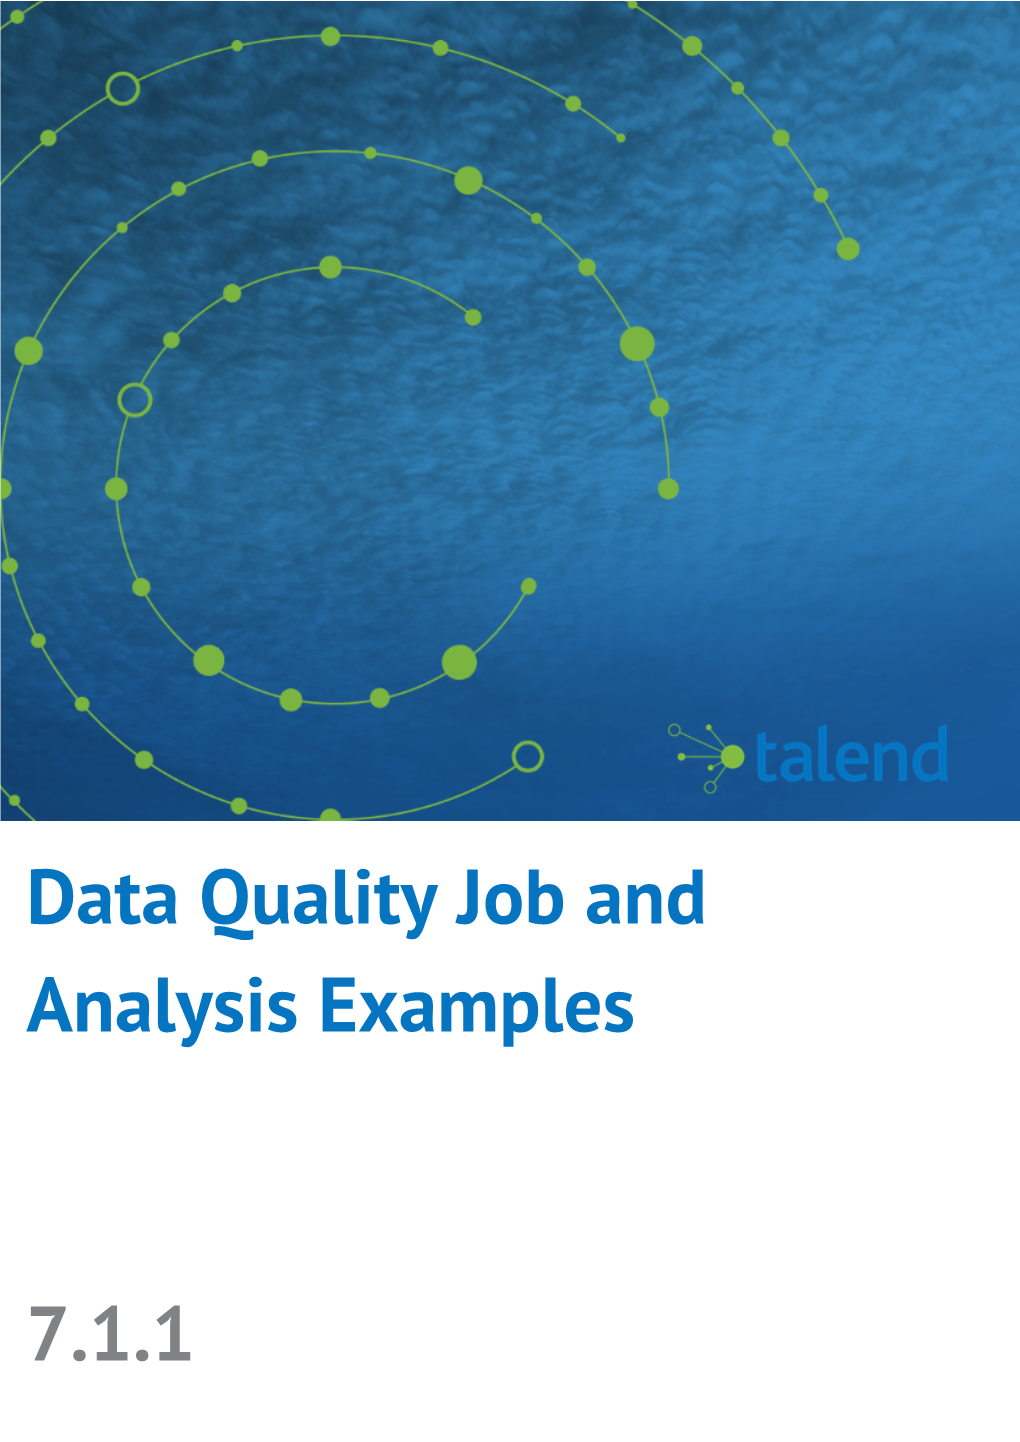 Data Quality Job and Analysis Examples